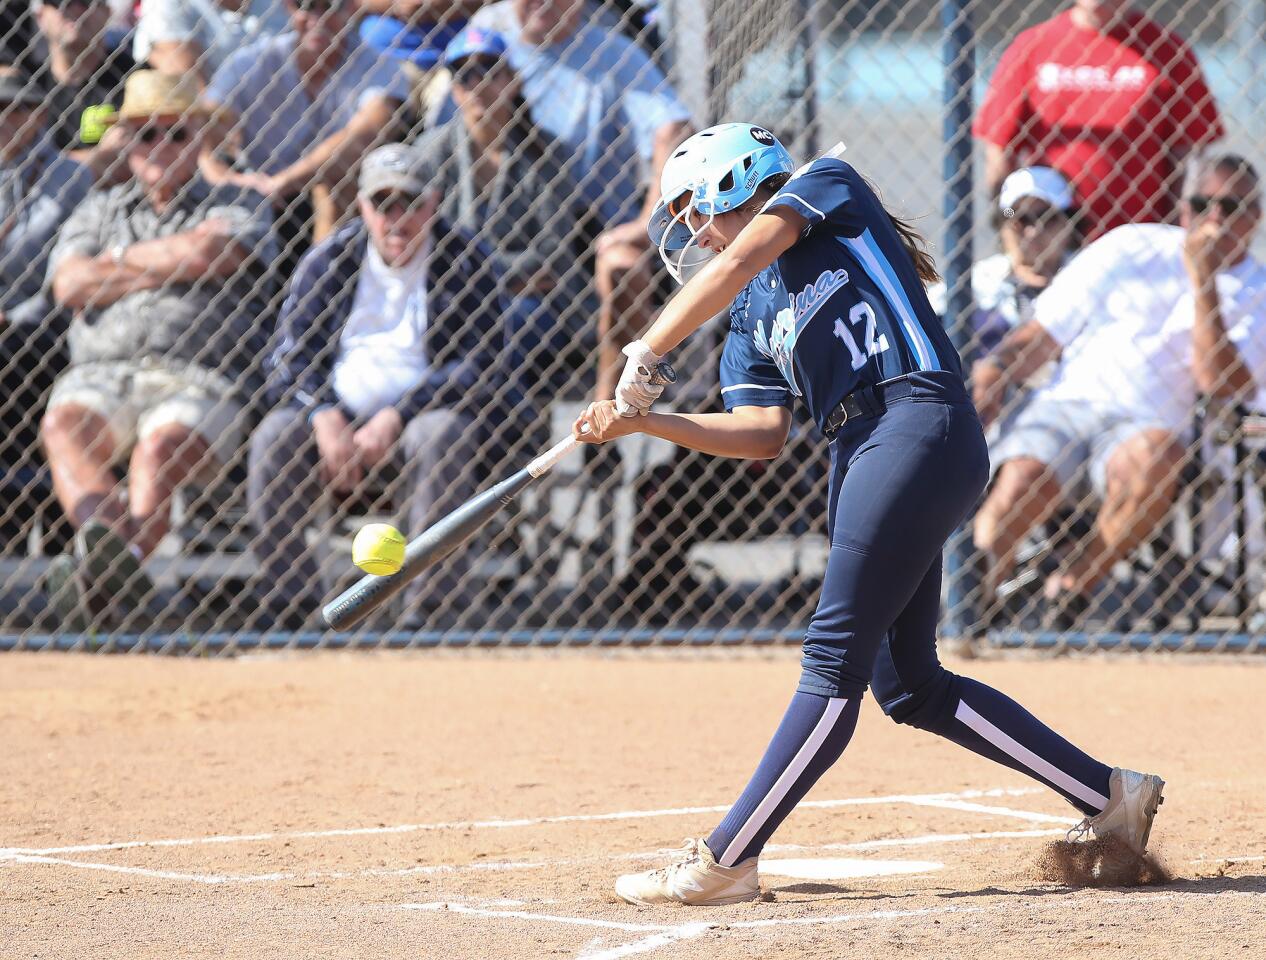 Briana Gonzalez singles to left field in Marina High's Surf League home game against Los Alamitos on Tuesday.